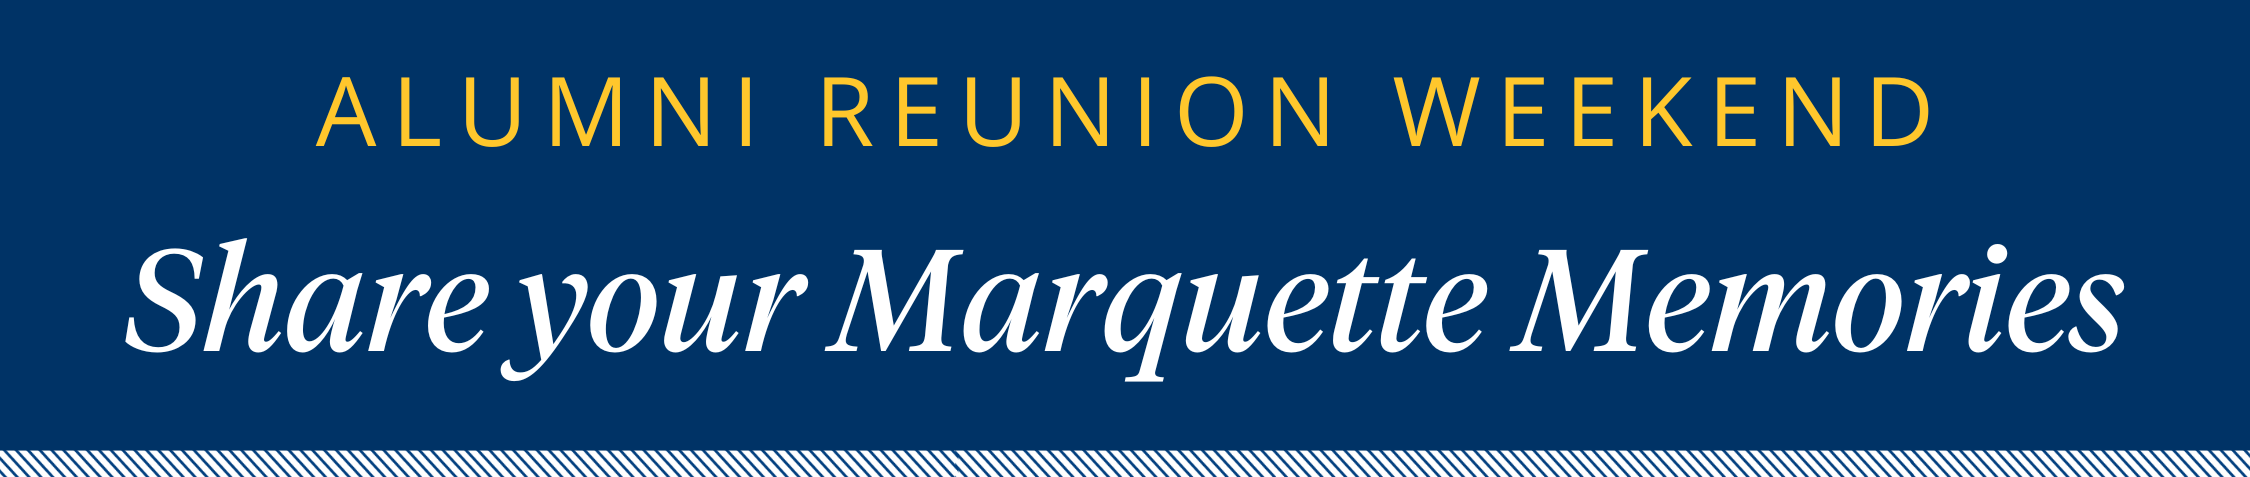 Share your Marquette Memories